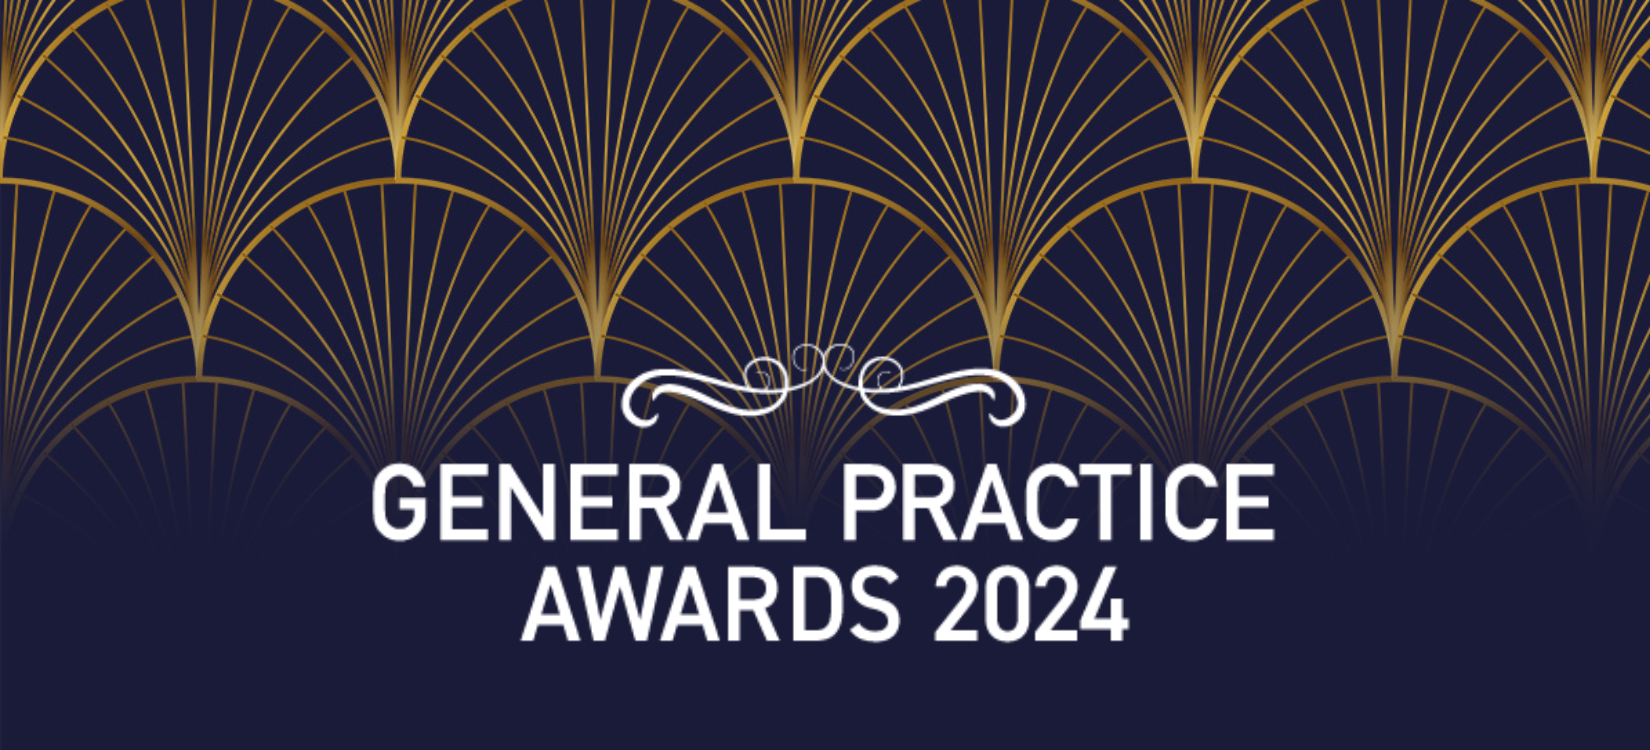 Nominations now open for the General Practice Awards 2024